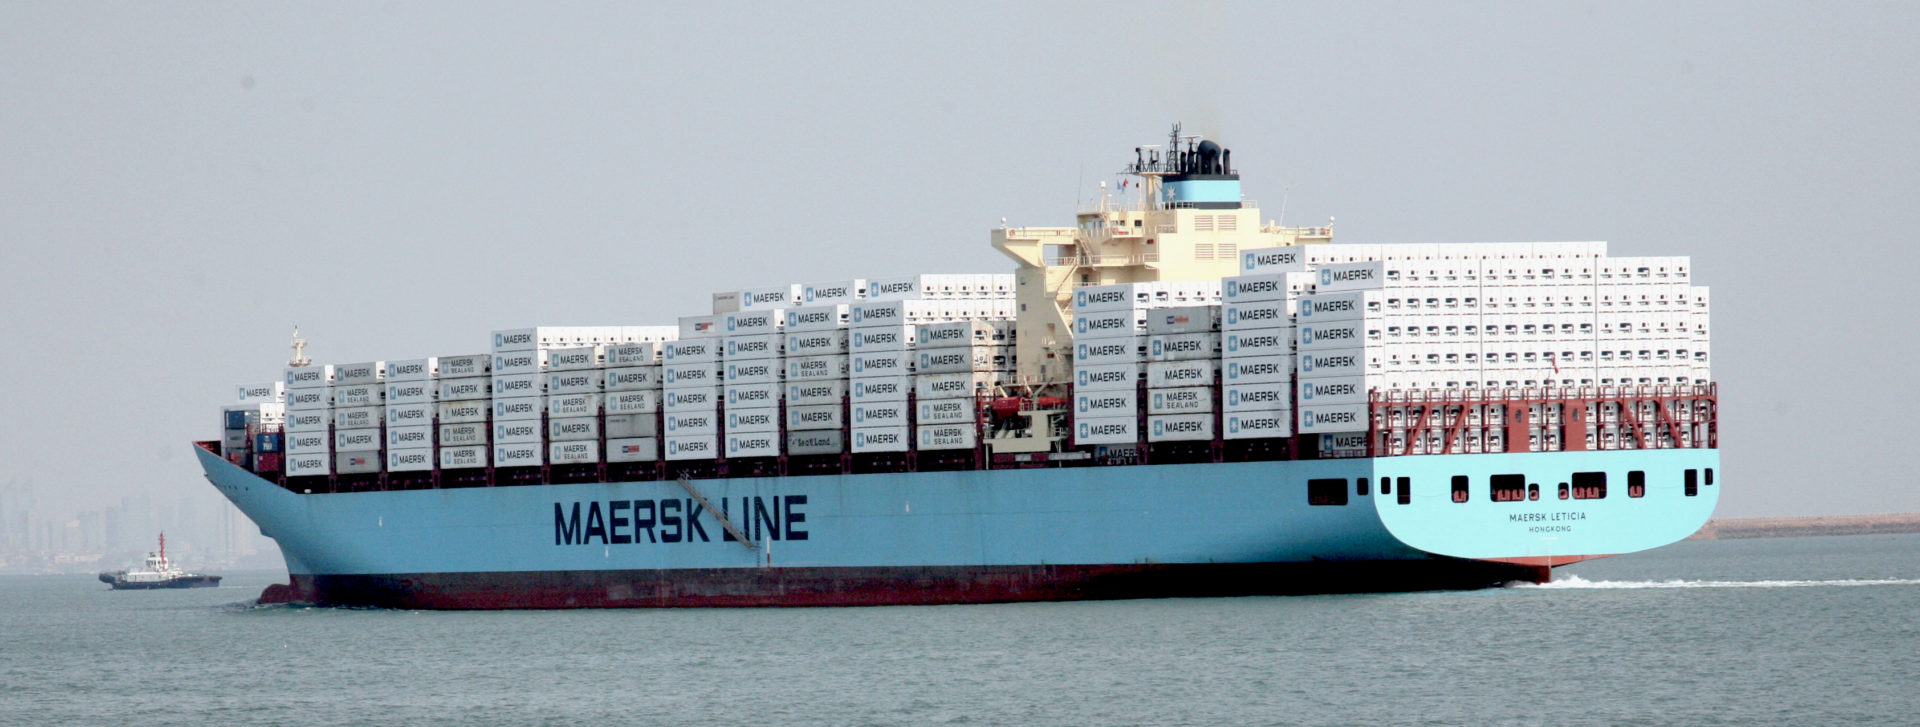 Divide & Conquer: Maersk Splits to Go After Competition - Universal Cargo